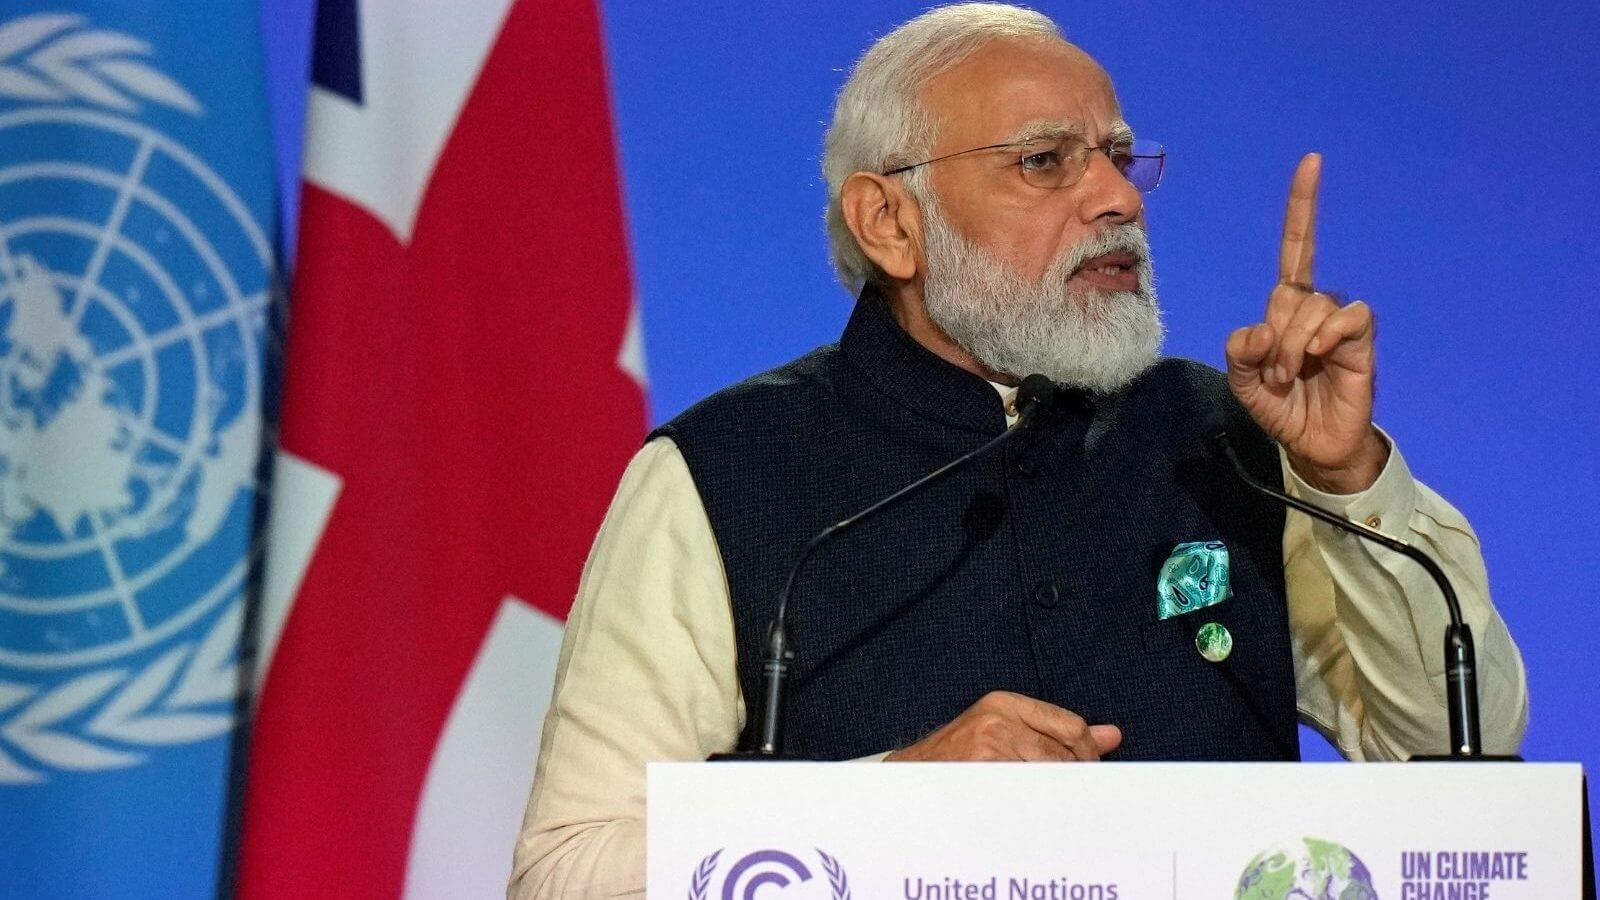 Modi Commits to Carbon Neutrality by 2070 at COP26